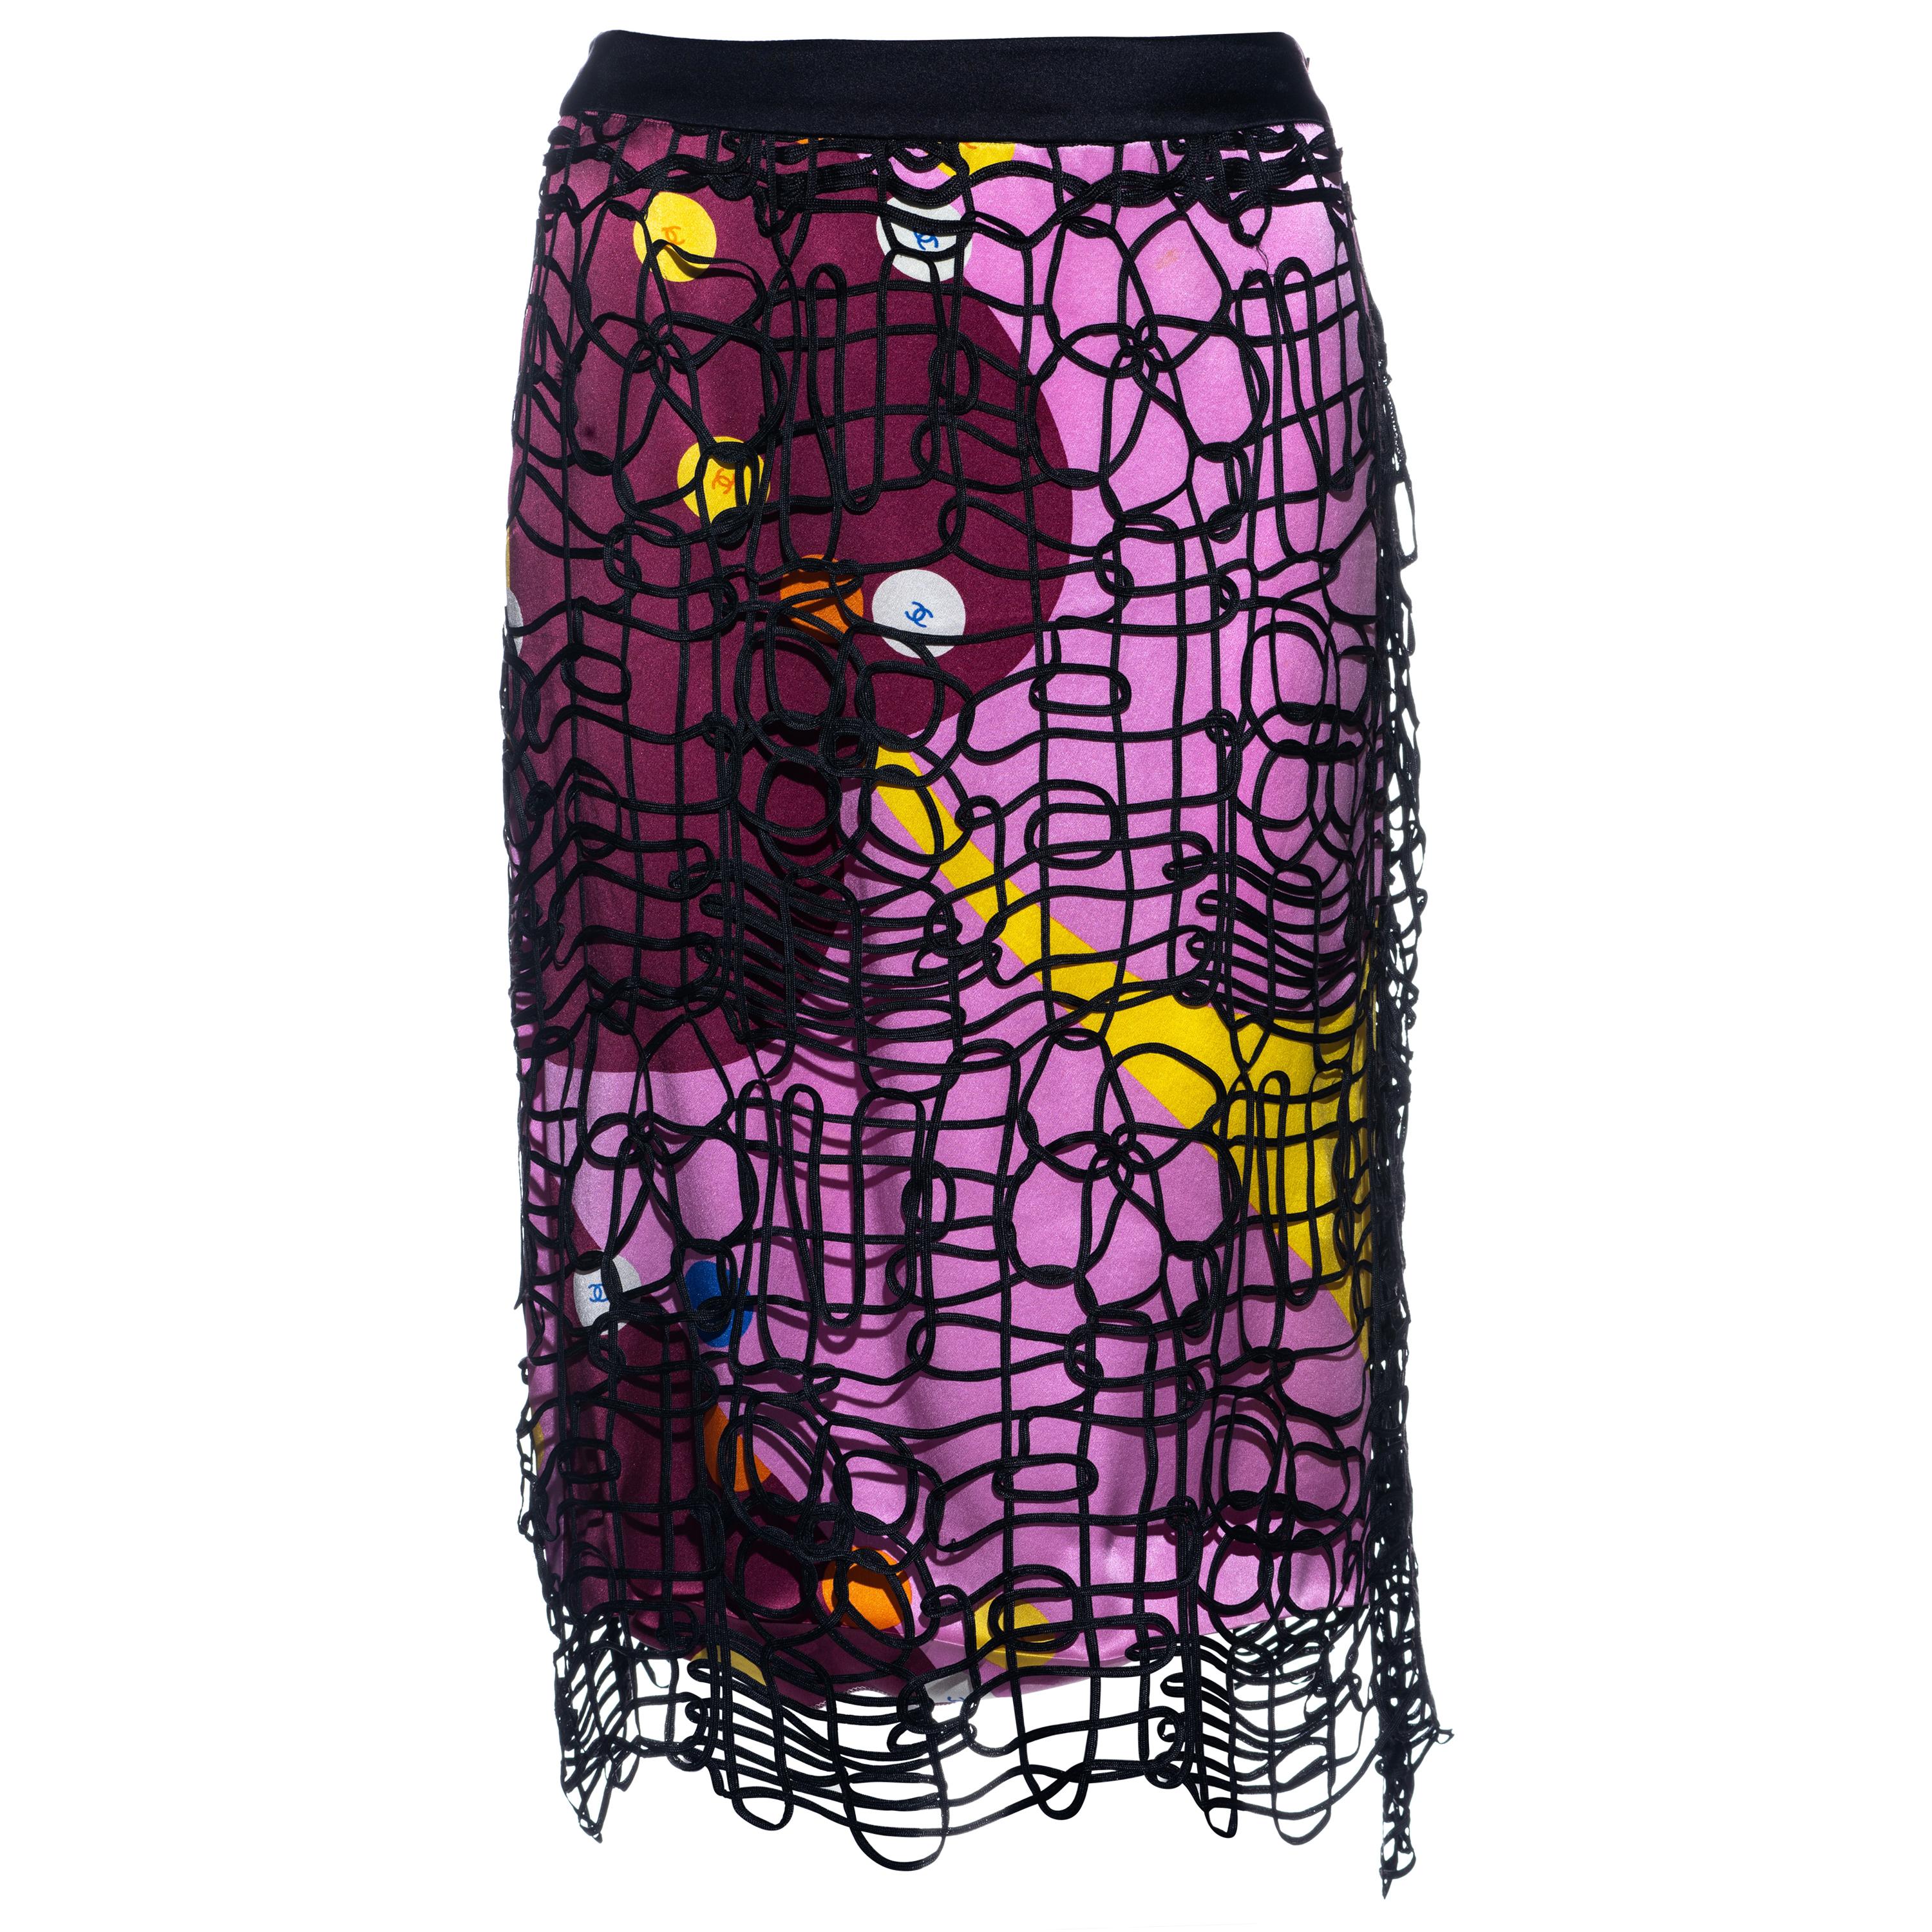 Chanel by Karl Lagerfeld multicoloured silk skirt with ribbon overlay, ss 2000